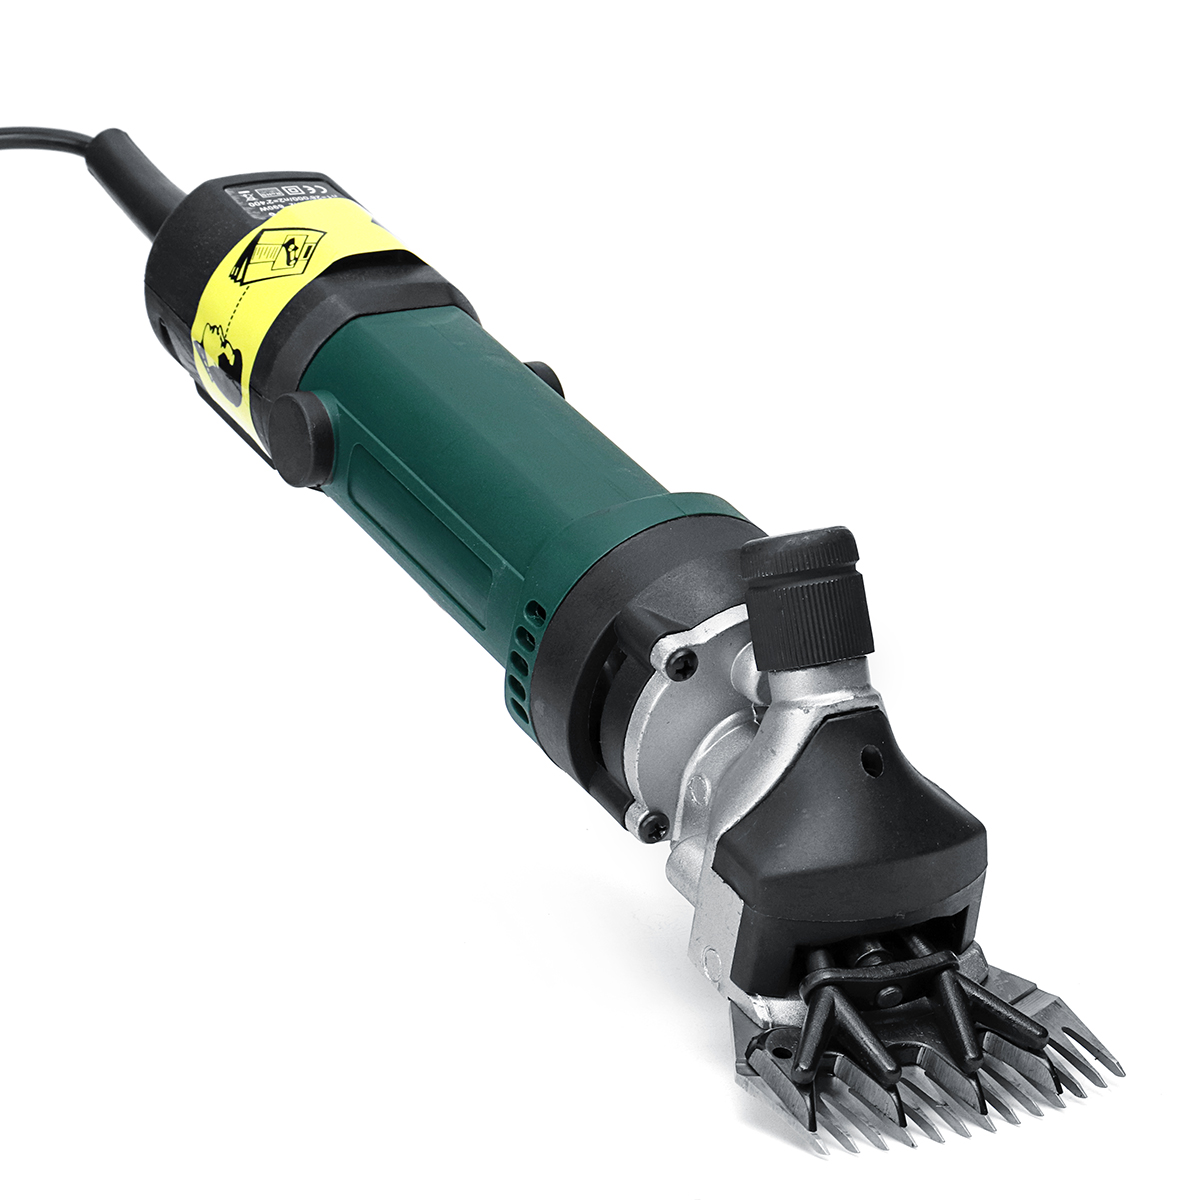 690W-6-Speed-Adjustable-Electric-Sheep-Shearing-Clipper-Shears-Goats-Hair-Removal-Trimmer-1323344-7